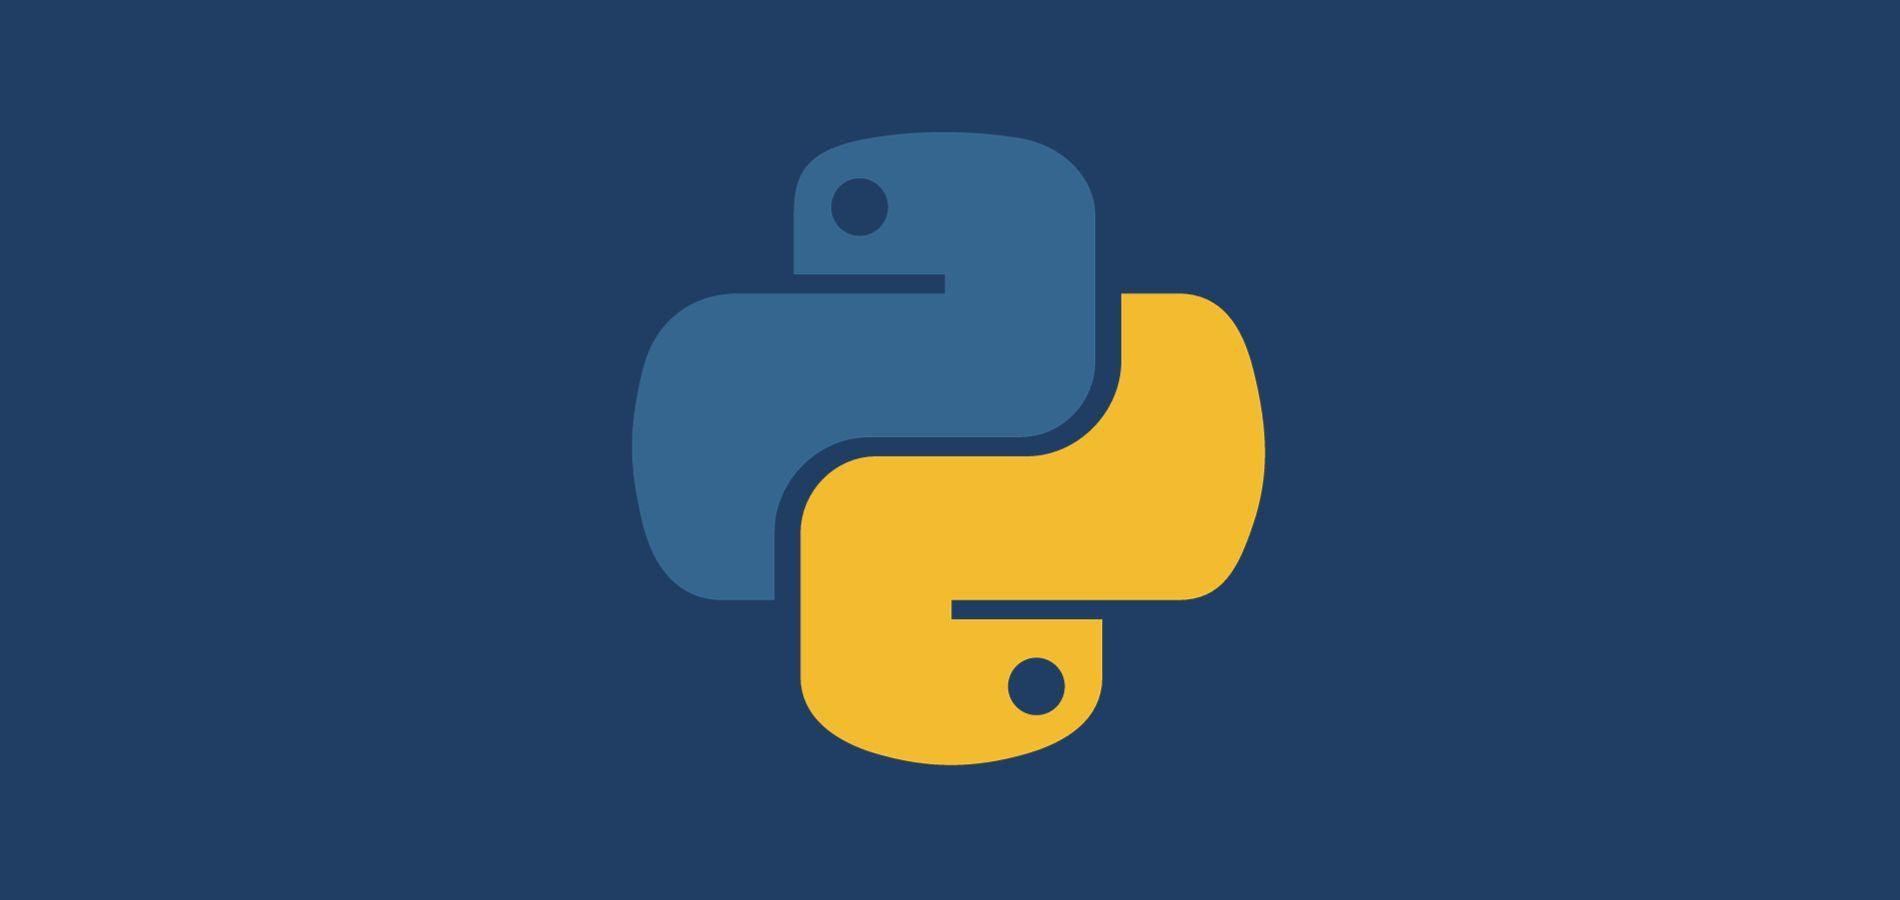 Why isn't method overloading supported in Python? - Quora